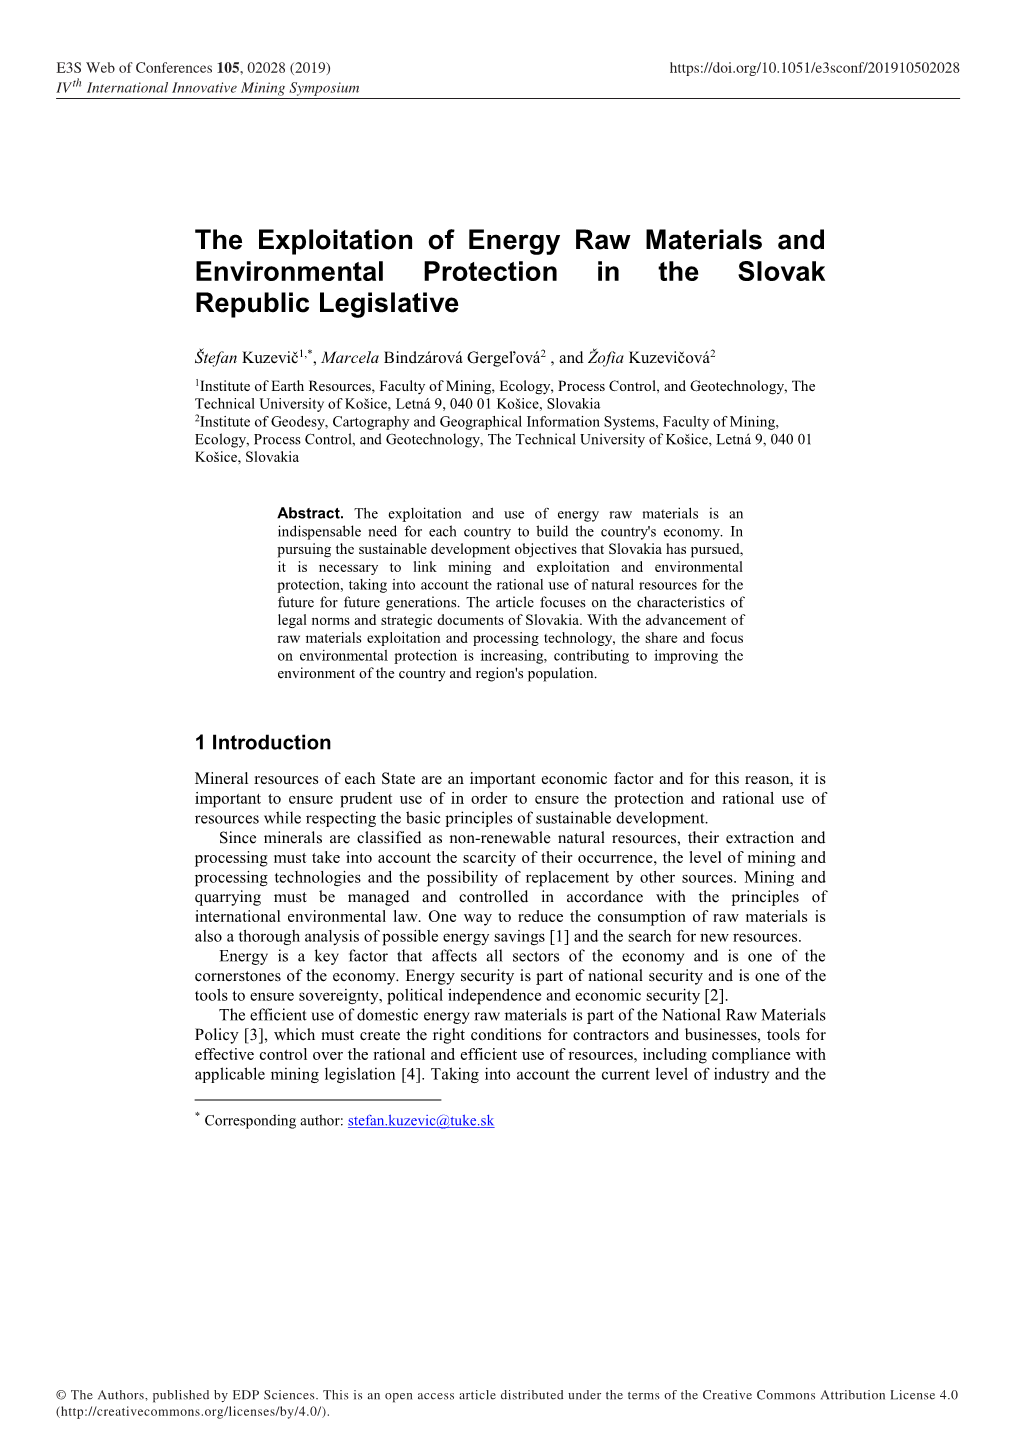 The Exploitation of Energy Raw Materials and Environmental Protection in the Slovak Republic Legislative